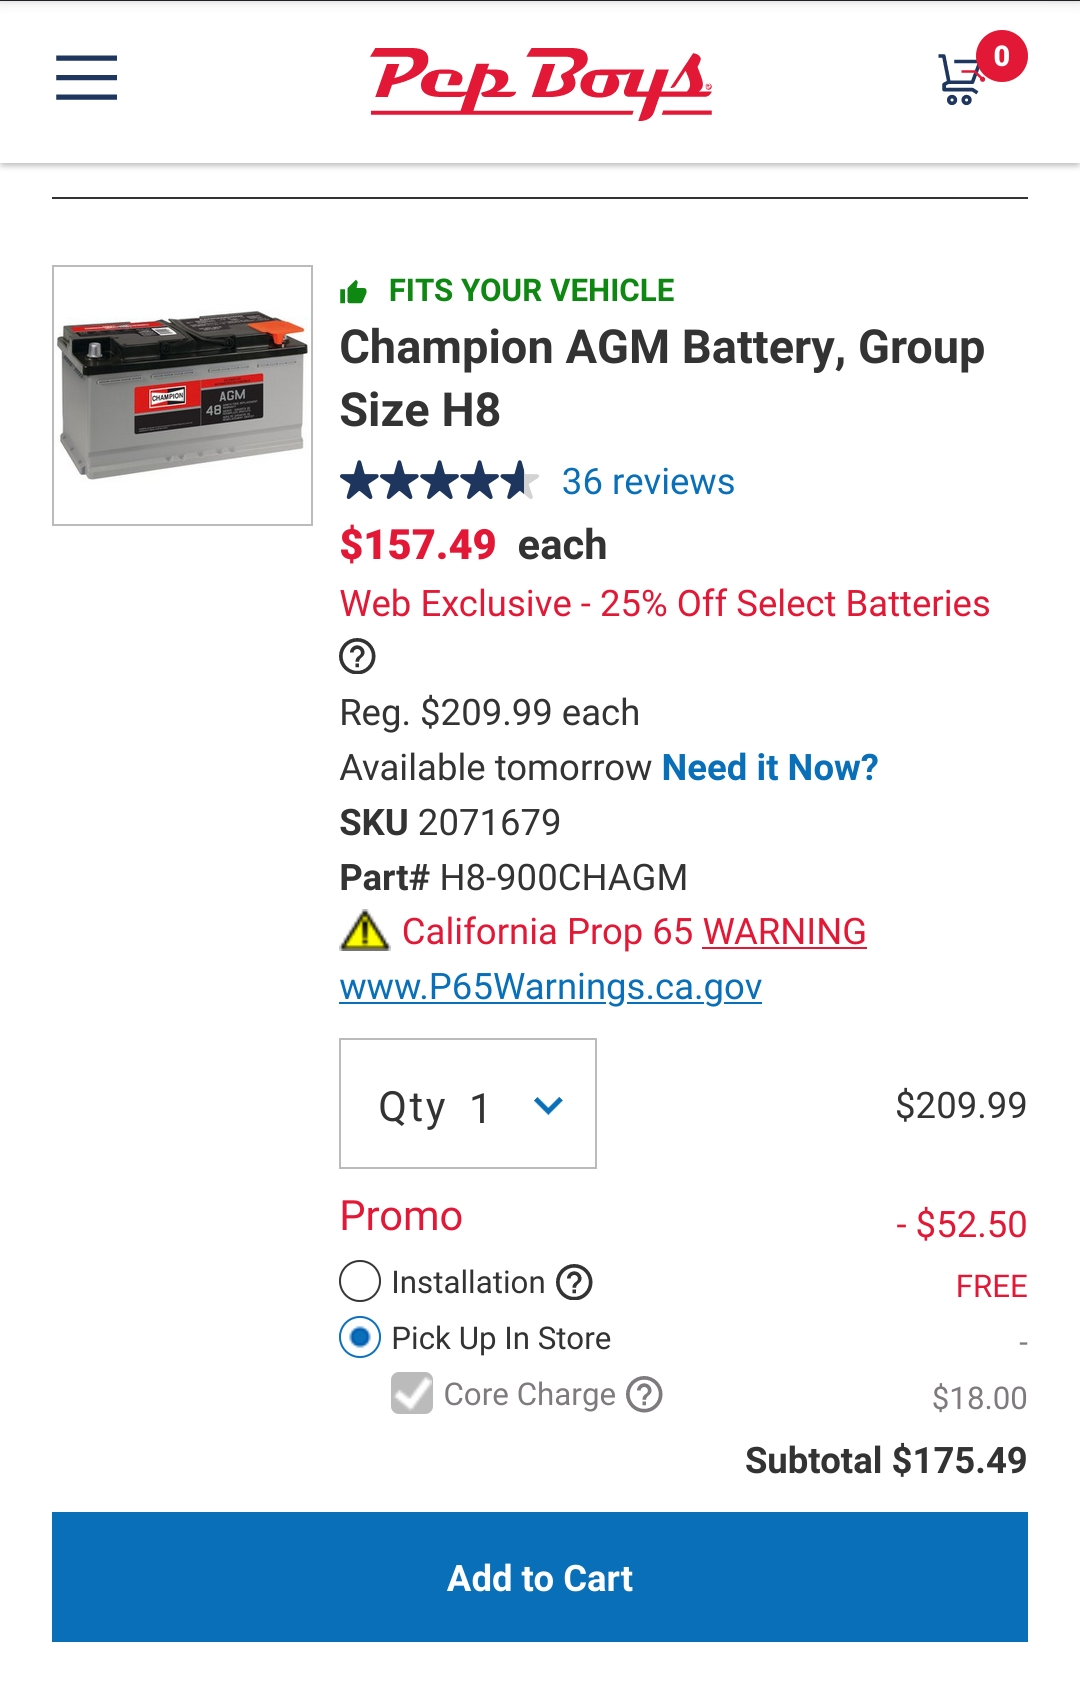 champion-agm-battery-25-off-40-rebate-at-pepboys-page-2-nas